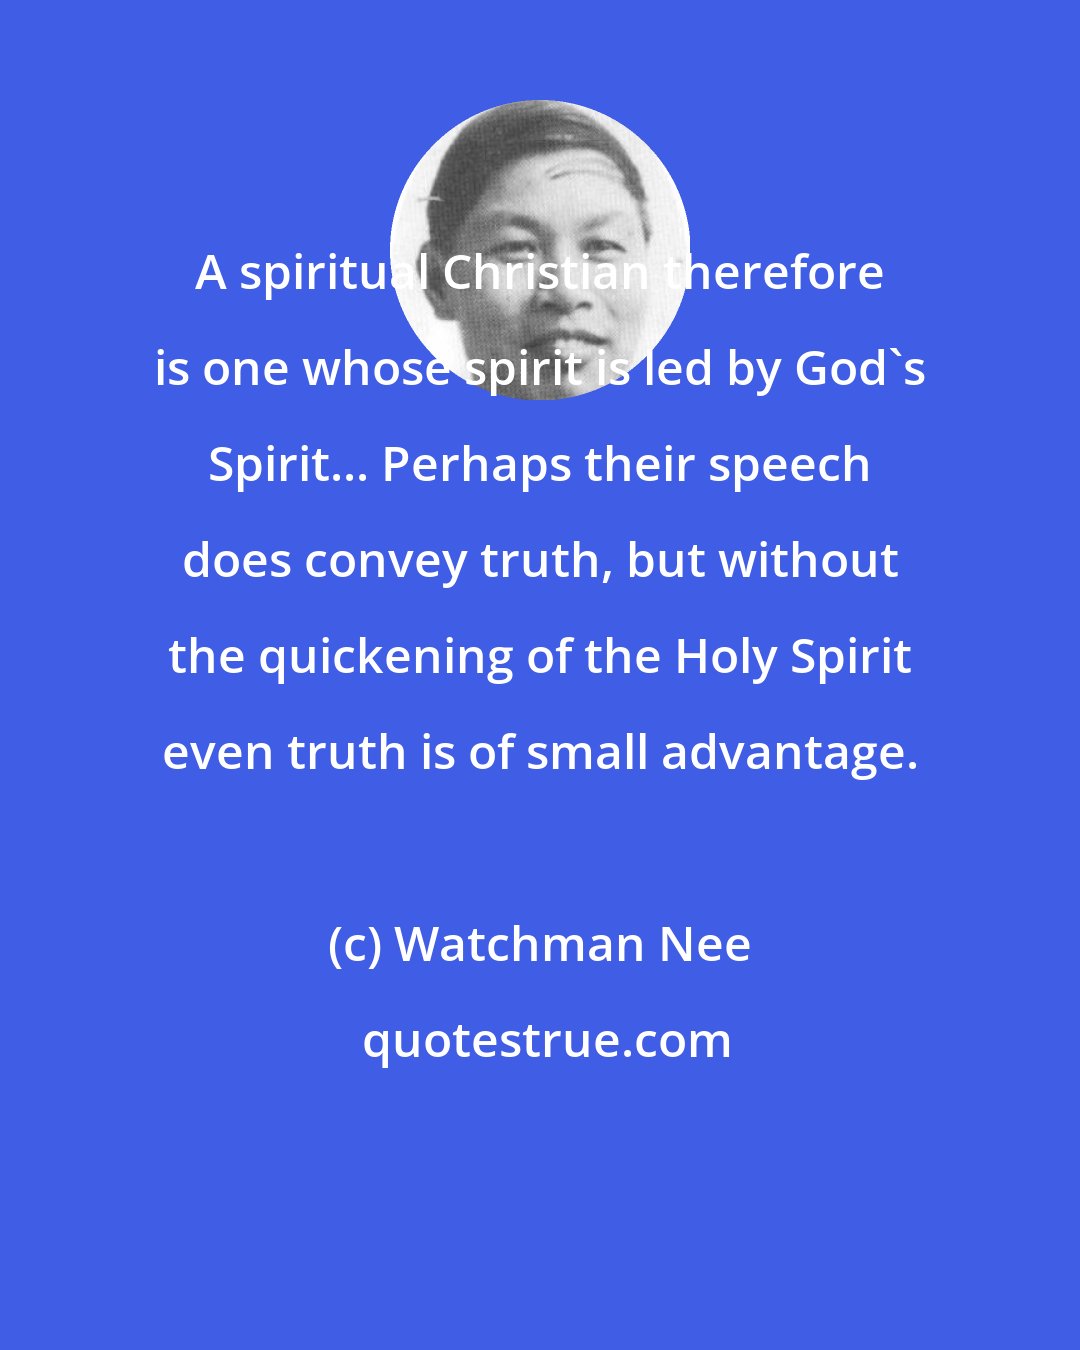 Watchman Nee: A spiritual Christian therefore is one whose spirit is led by God's Spirit... Perhaps their speech does convey truth, but without the quickening of the Holy Spirit even truth is of small advantage.